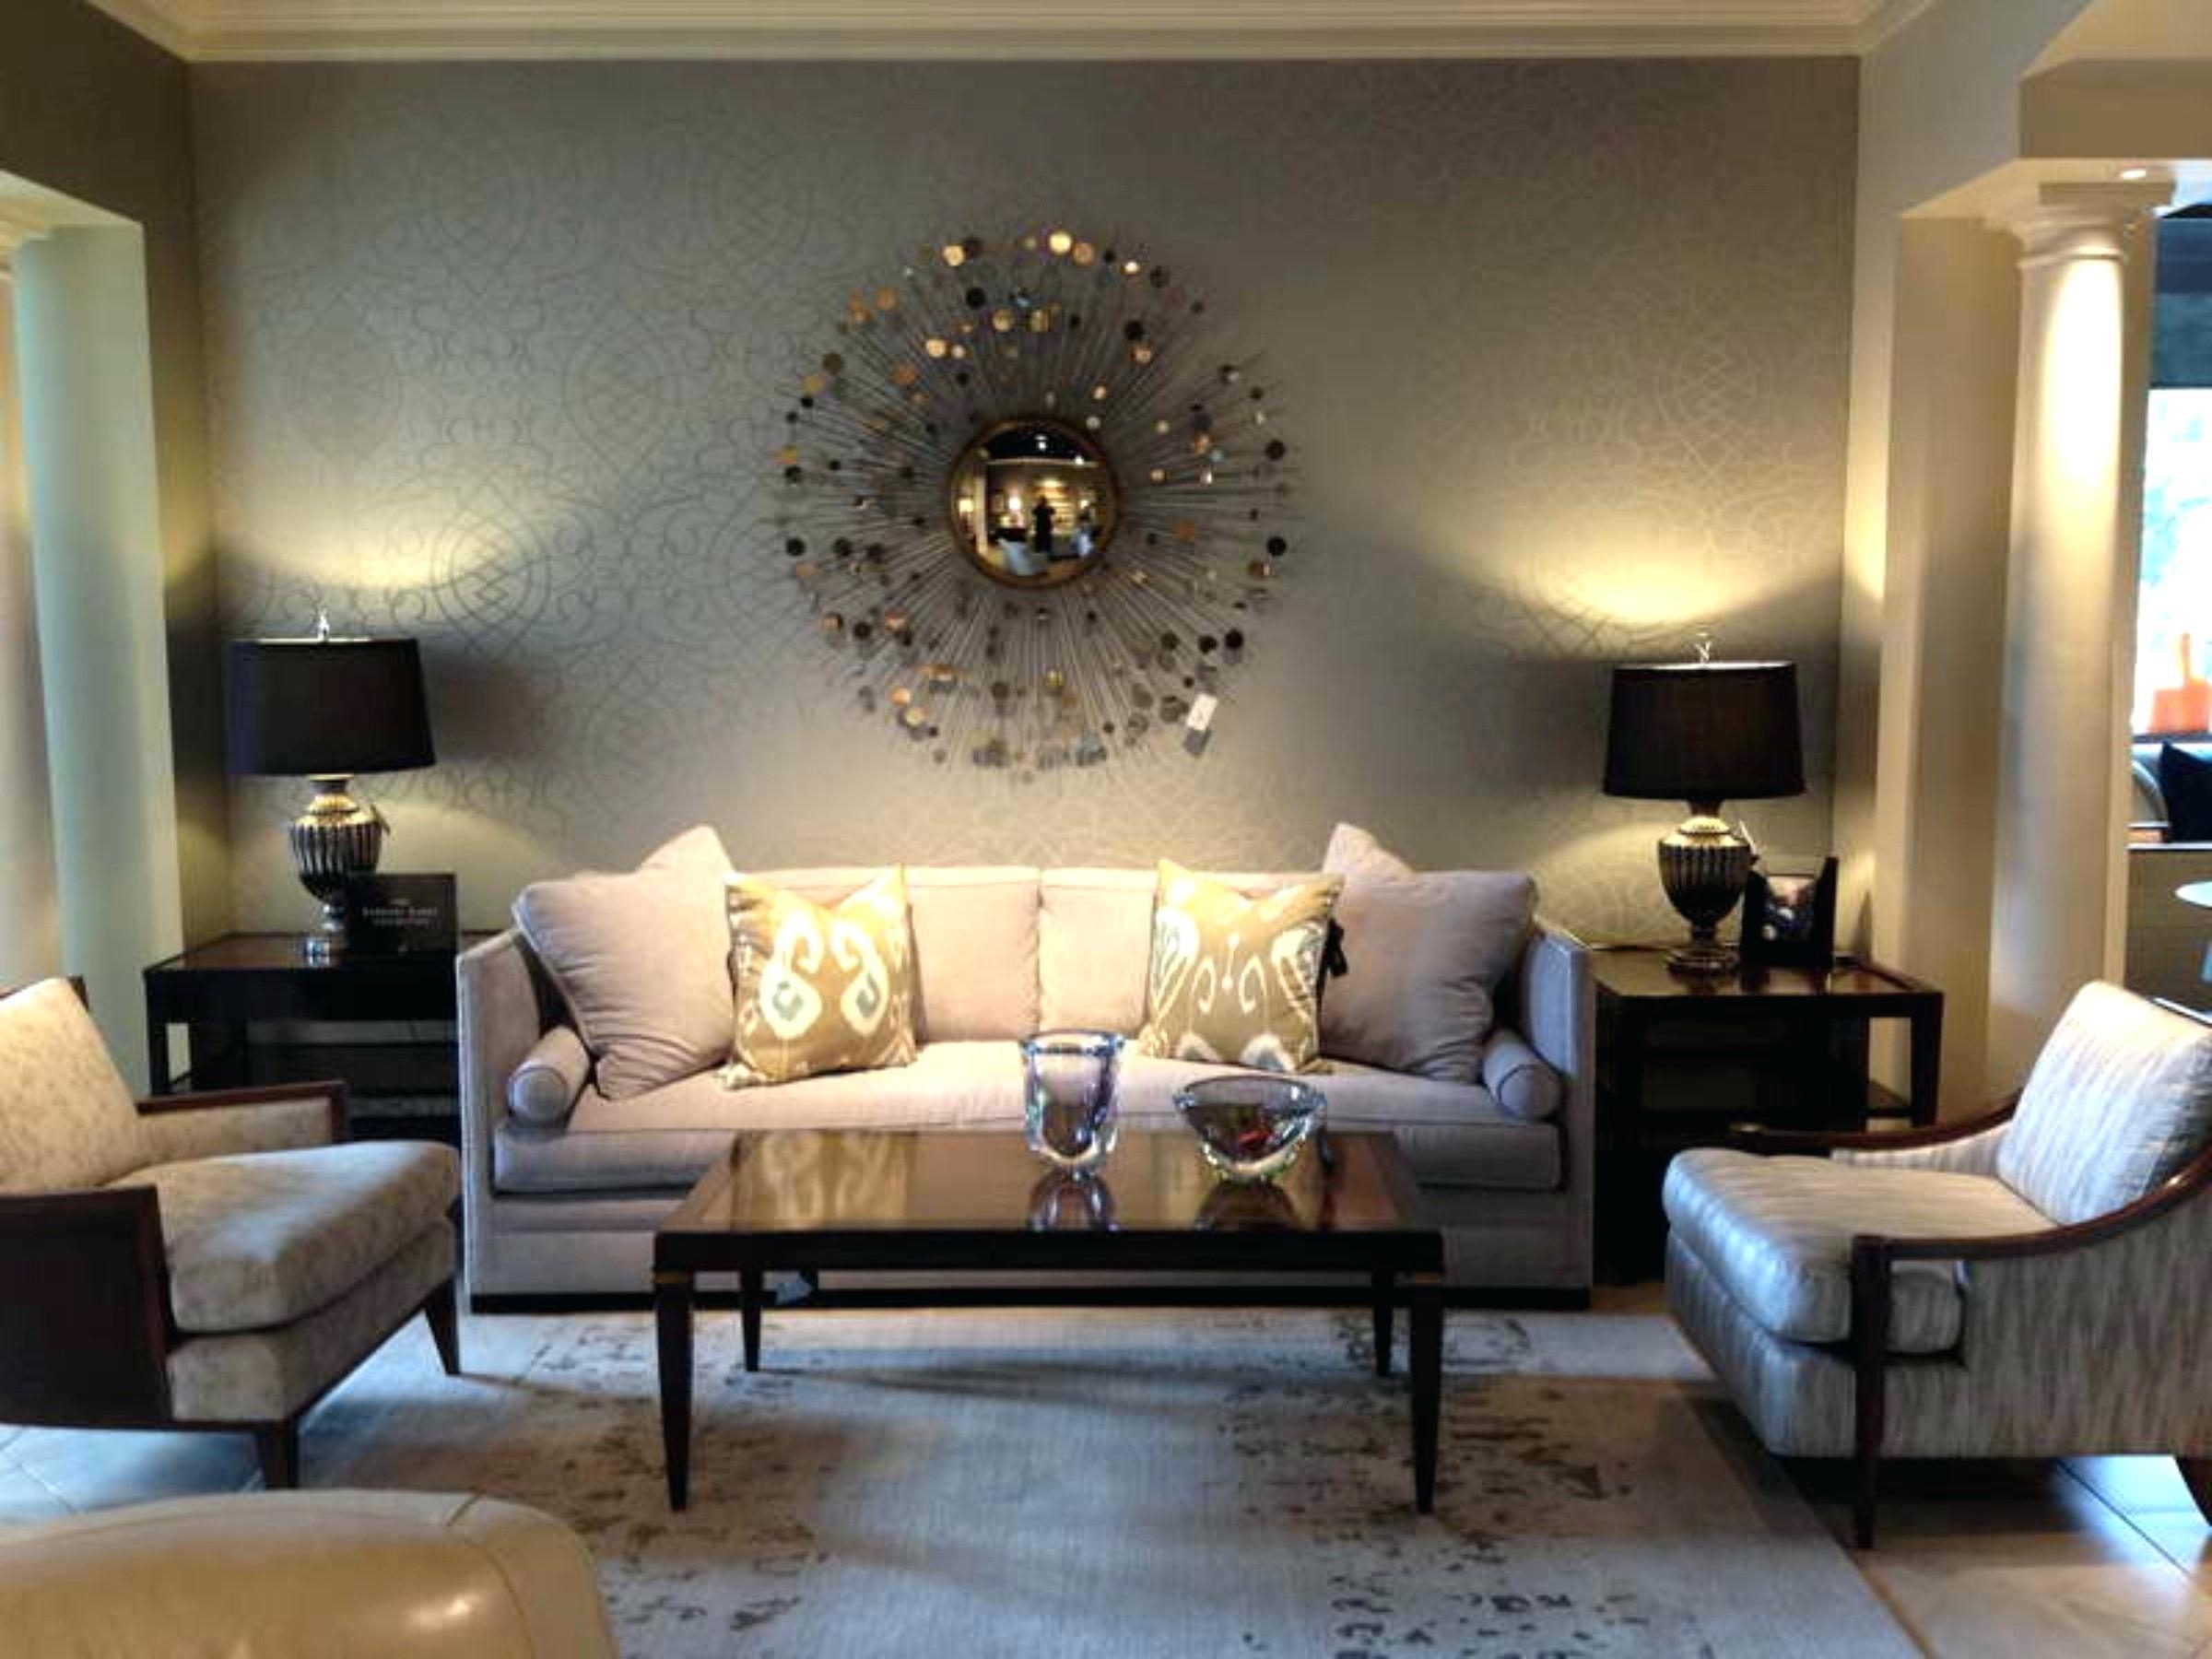 Living Room Wall Mirrors: Reflecting Style And Beauty